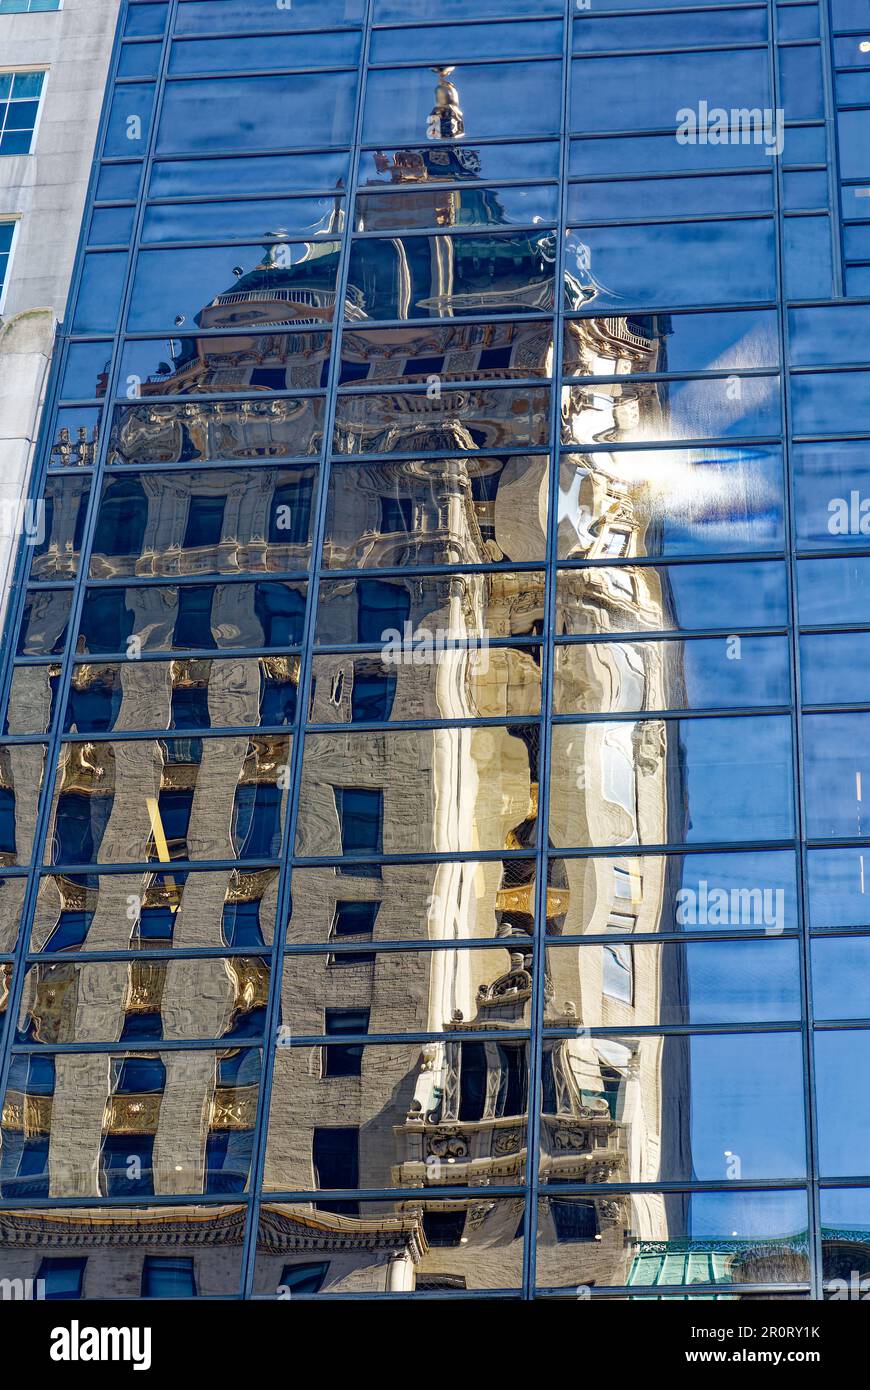 The Crown Building, reflected in Trump Tower on Fifth Avenue in Midtown Manhattan. Stock Photo